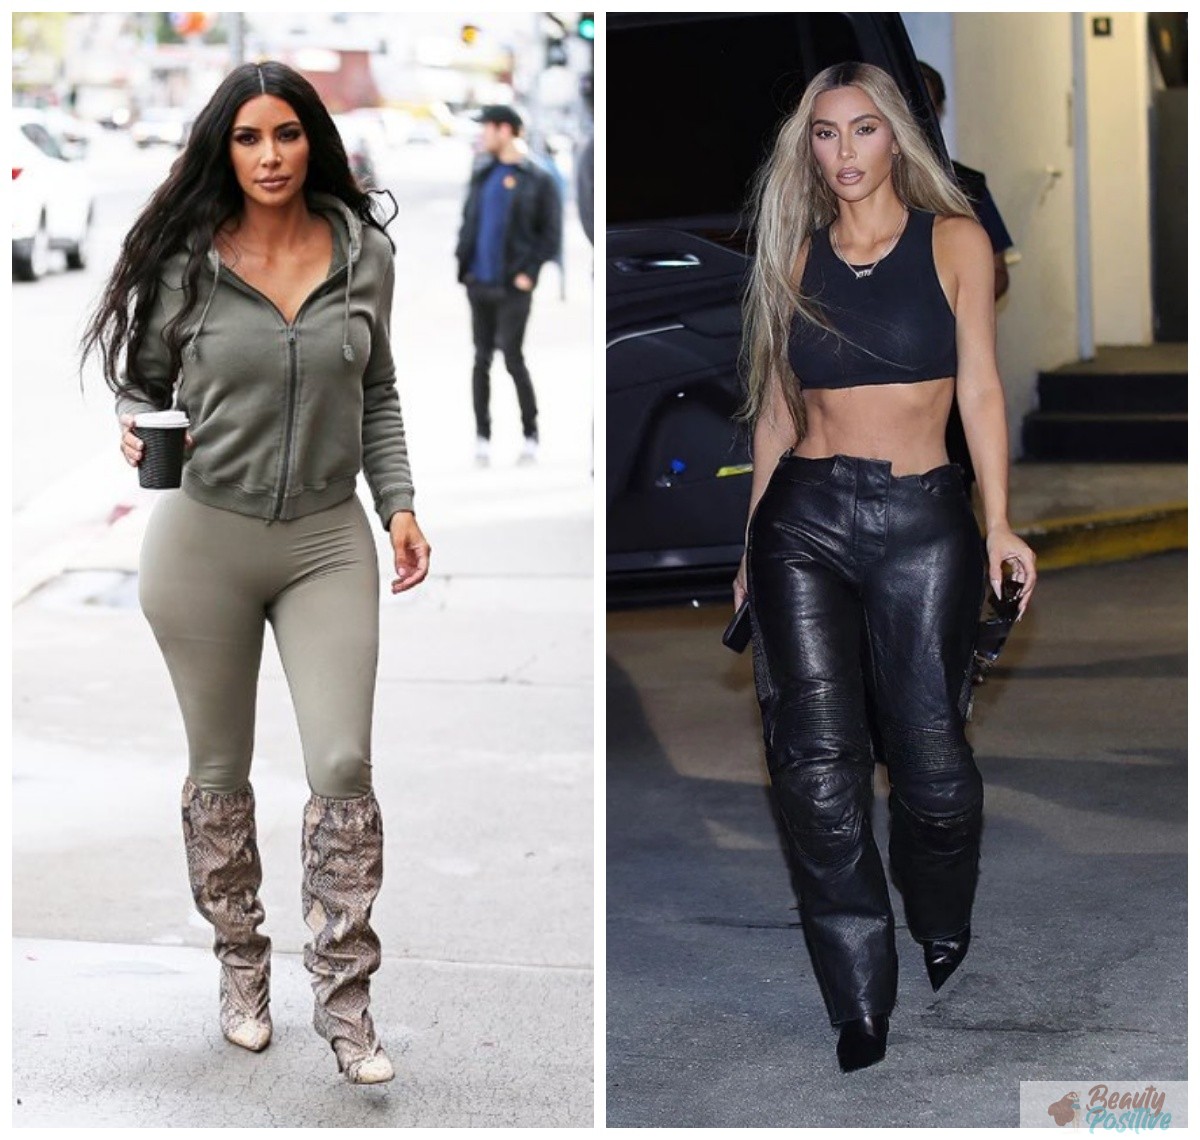 Kim before and after